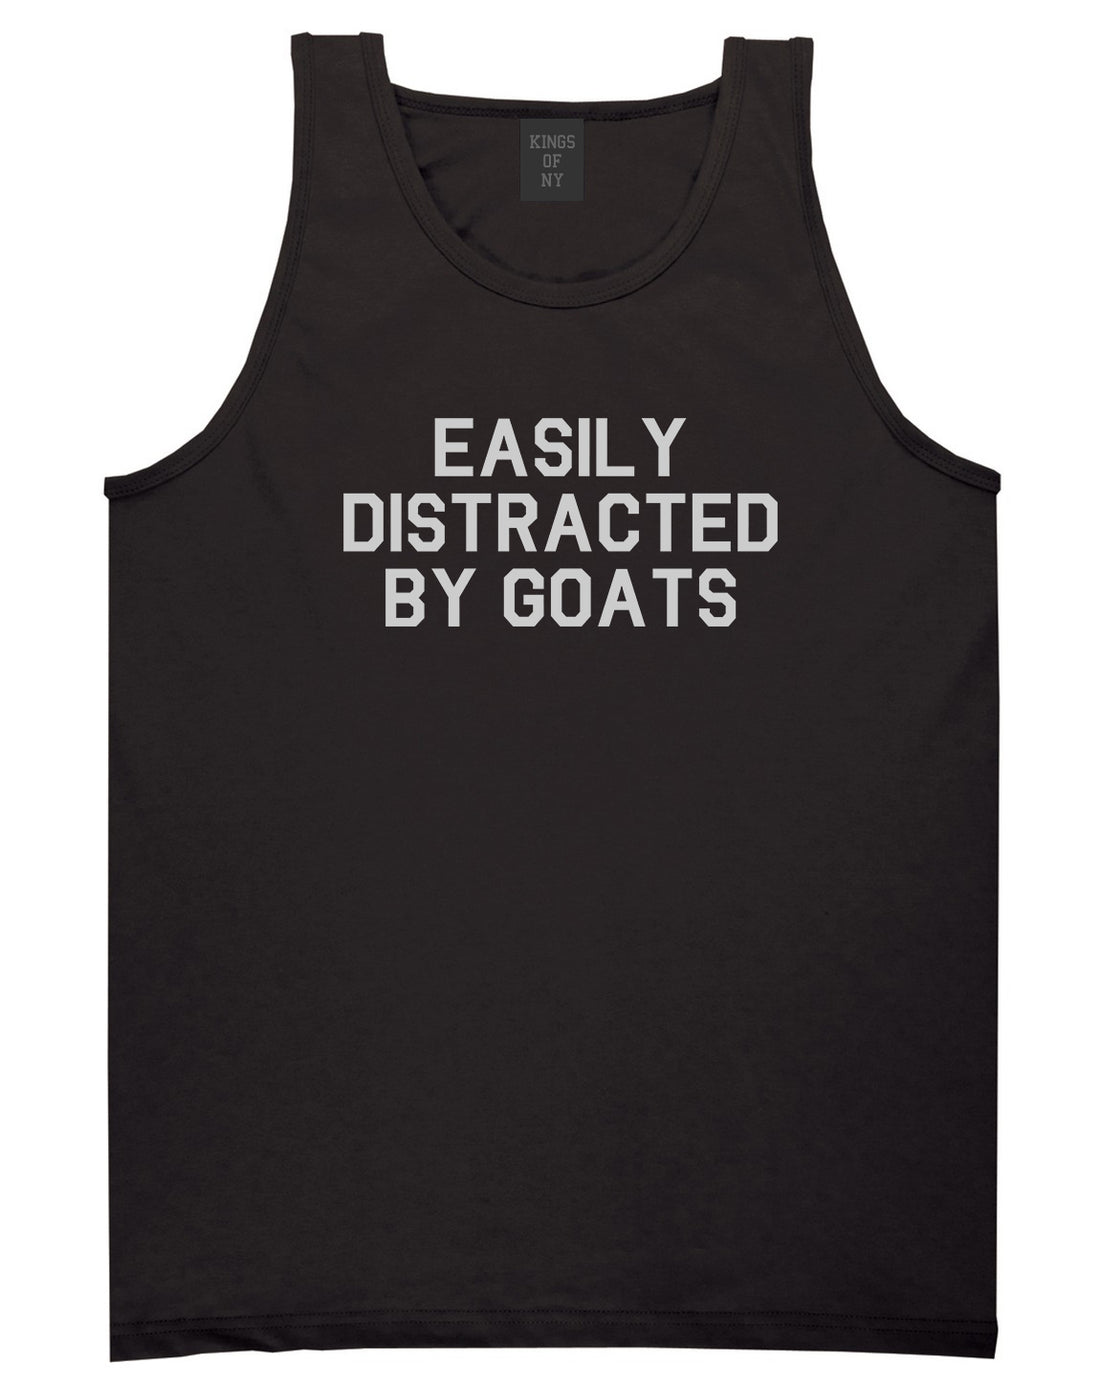 Easily Distracted By Goats Mens Tank Top Shirt Black